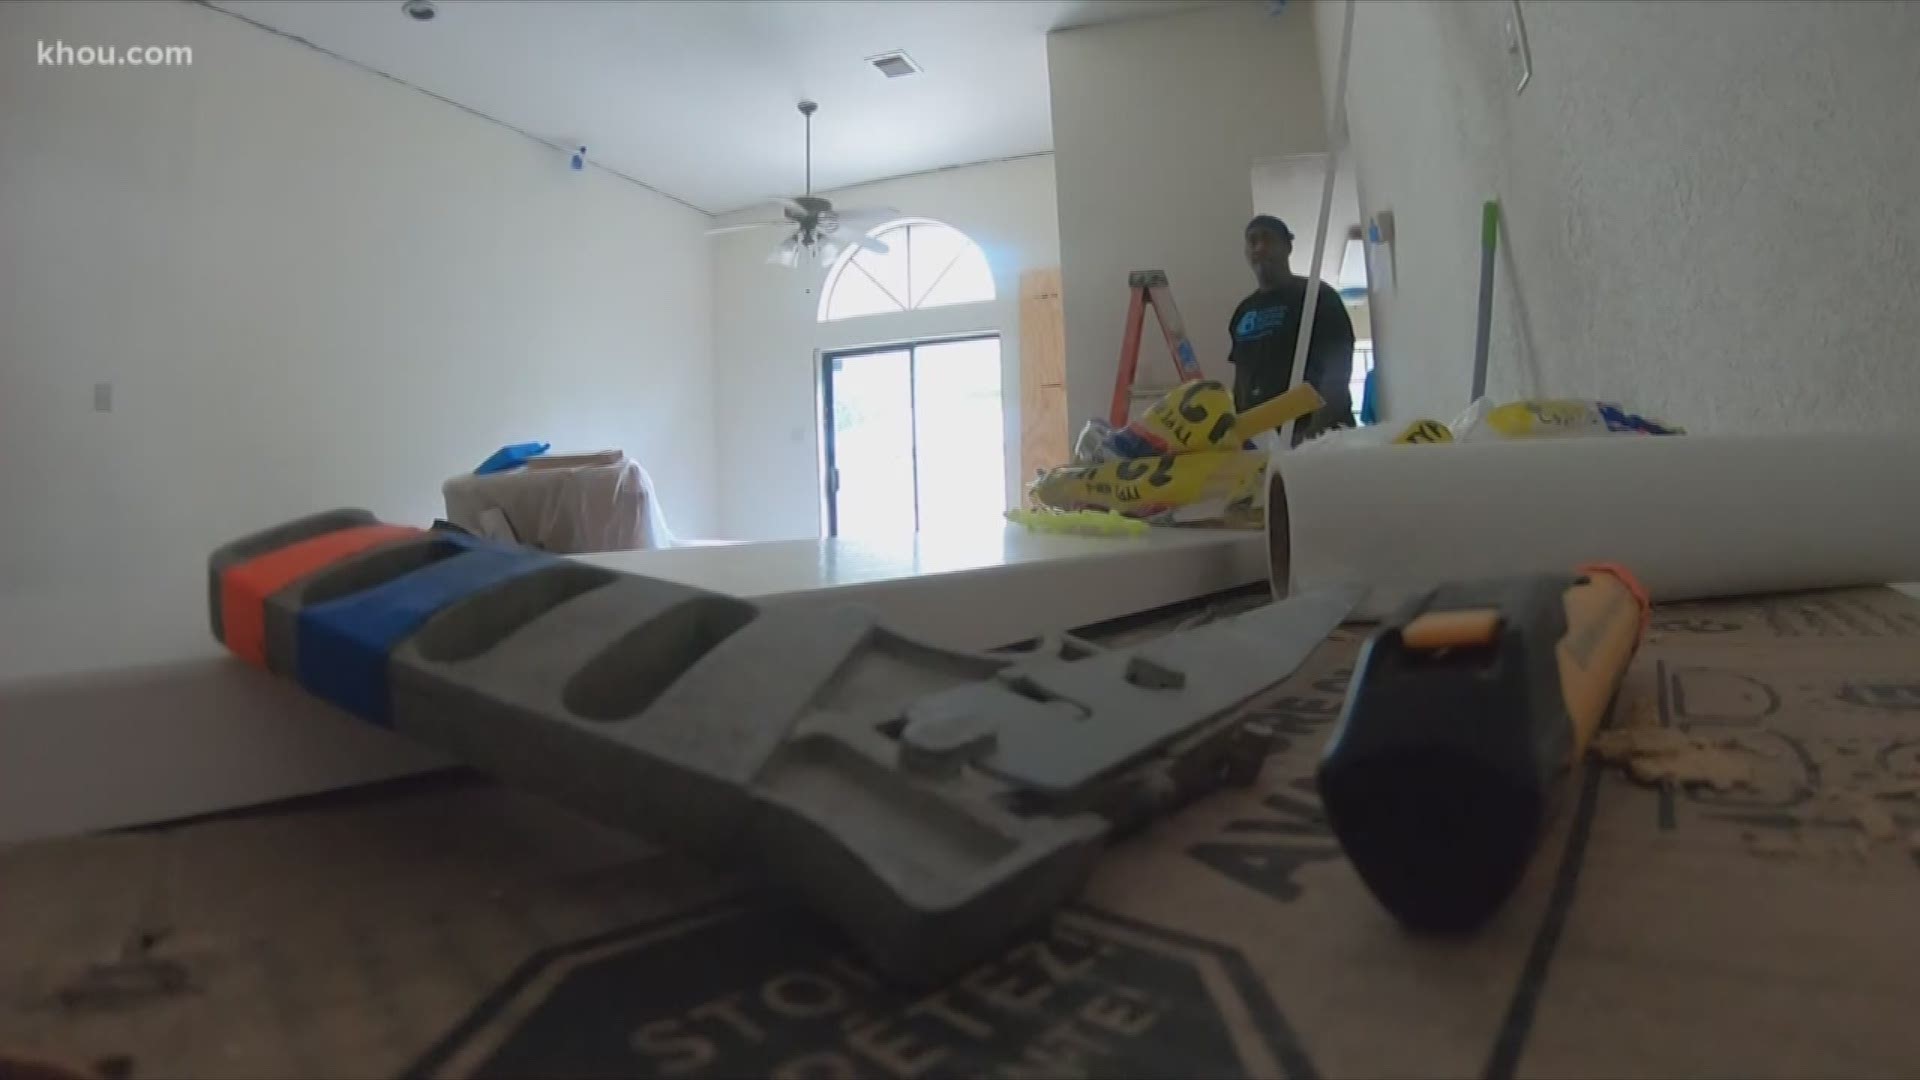 Lots of people are still trying to get back on their feet after Hurricane Harvey. Some are still rebuilding their homes two years later.